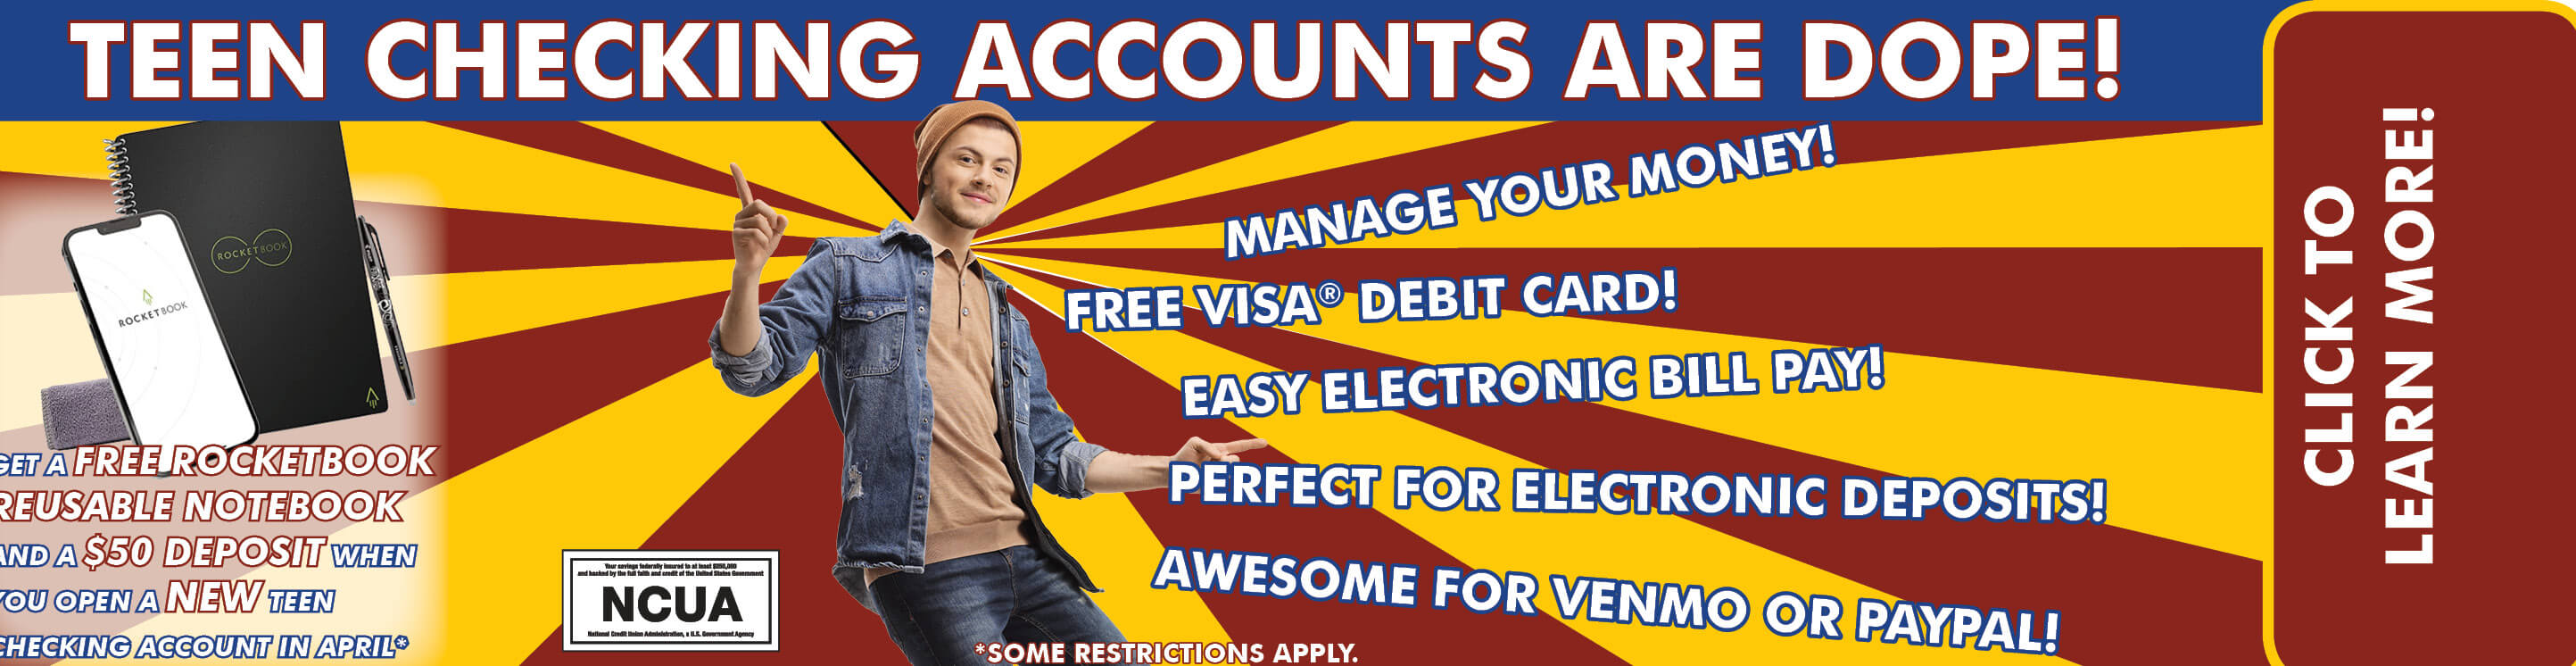 Open a NEW teen checking account and get a $50 Deposit and a FREE Rocketbook!